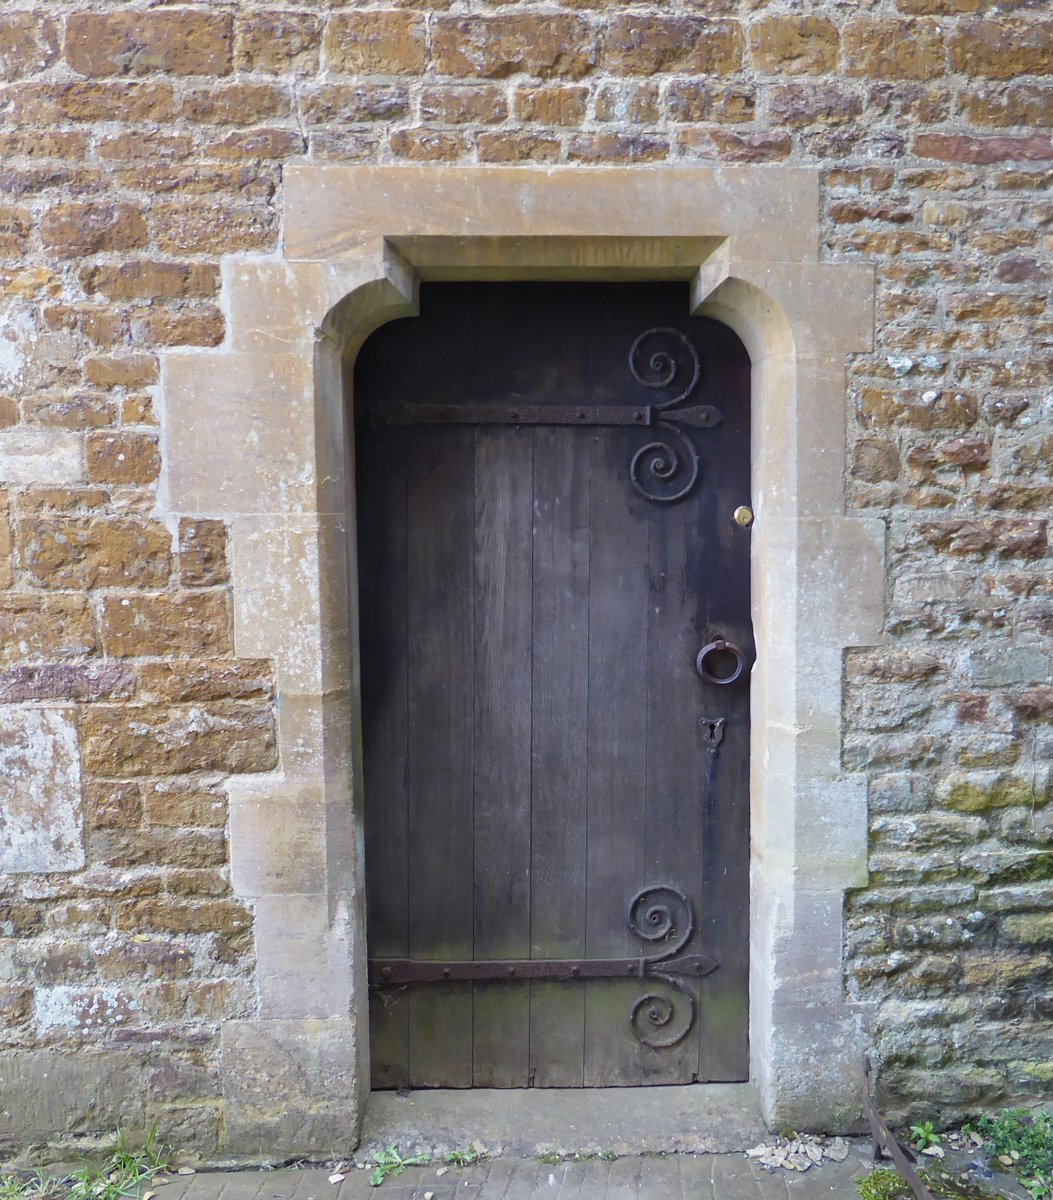 #AdoorableThursday at St Peter & St Paul, Kings Sutton.  The church is bursting with gorgeous doors, but this apparently modest door is one of my favourites.

The church was restored c 1866 by Sir G G Scott & the crispness of the stonework suggests he had at least a hand in this.